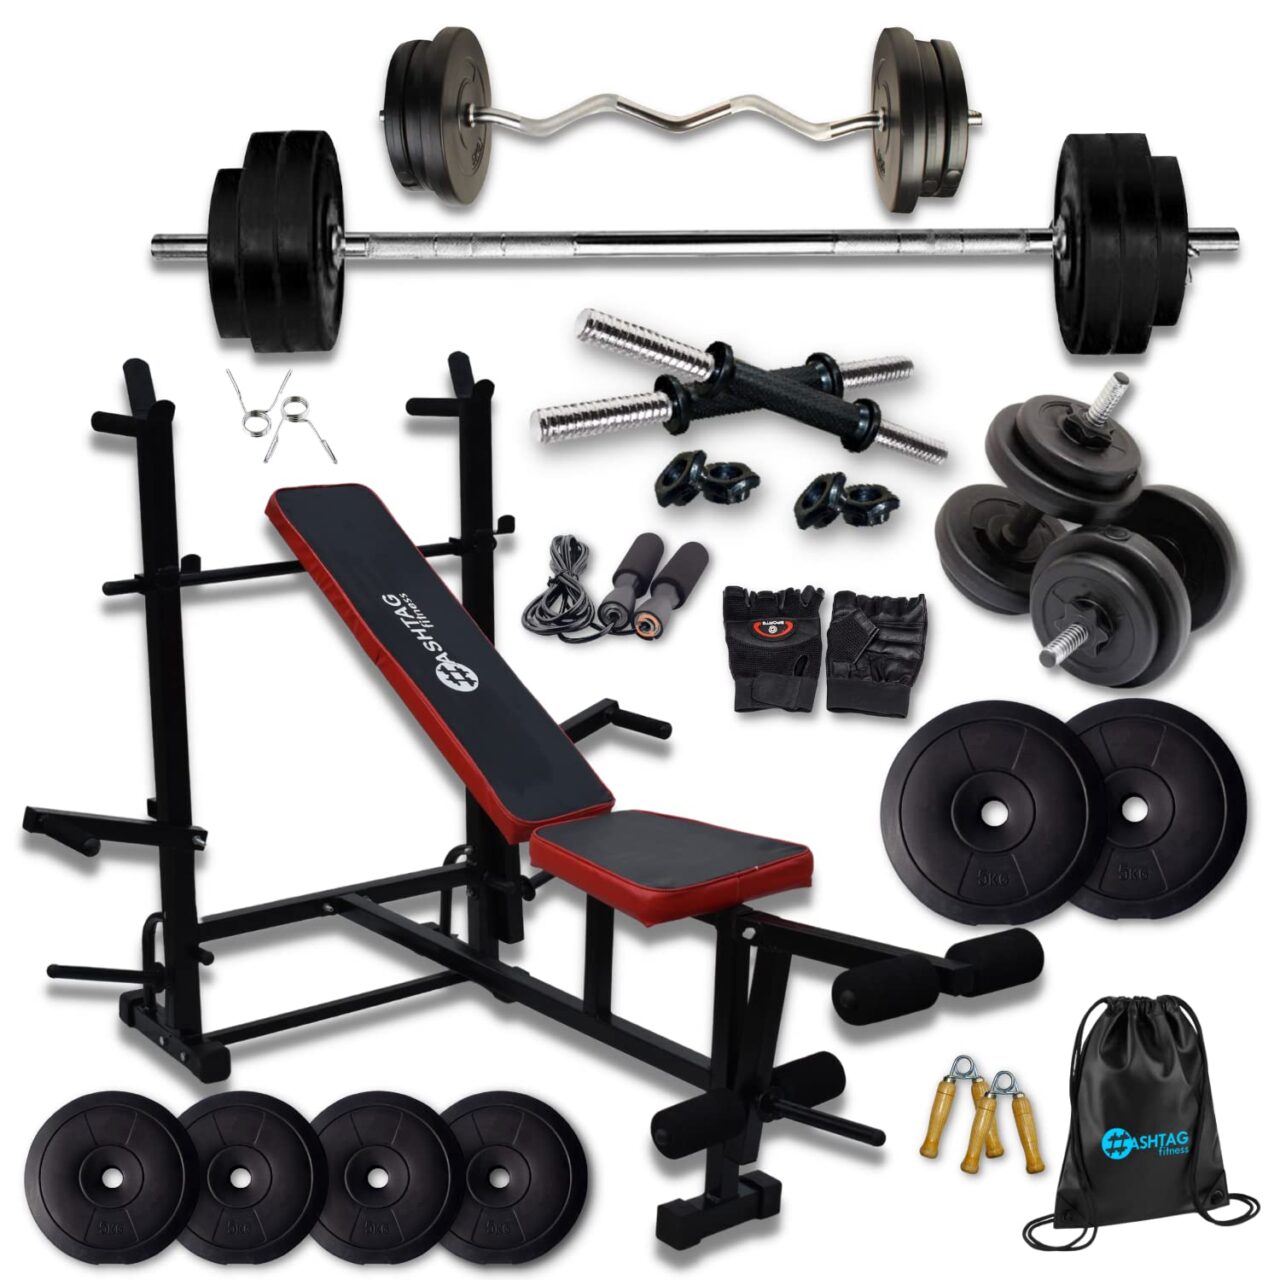 Top 10 Home Gym Equipment Options for Fitness Enthusiasts